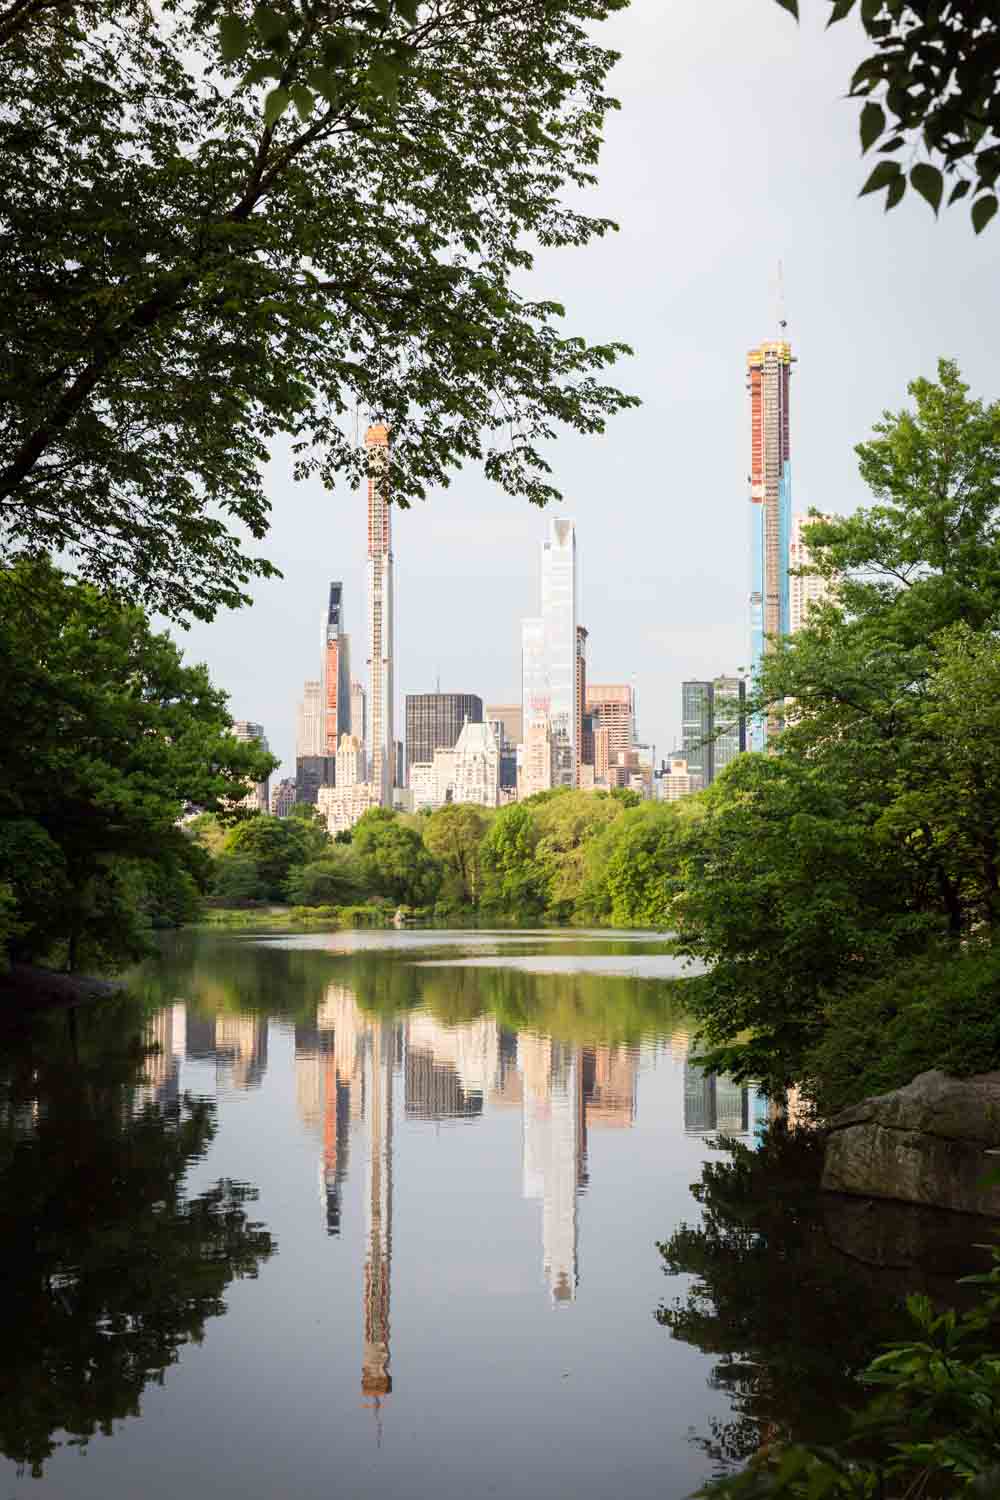 View of NYC skyline across Central Park lake